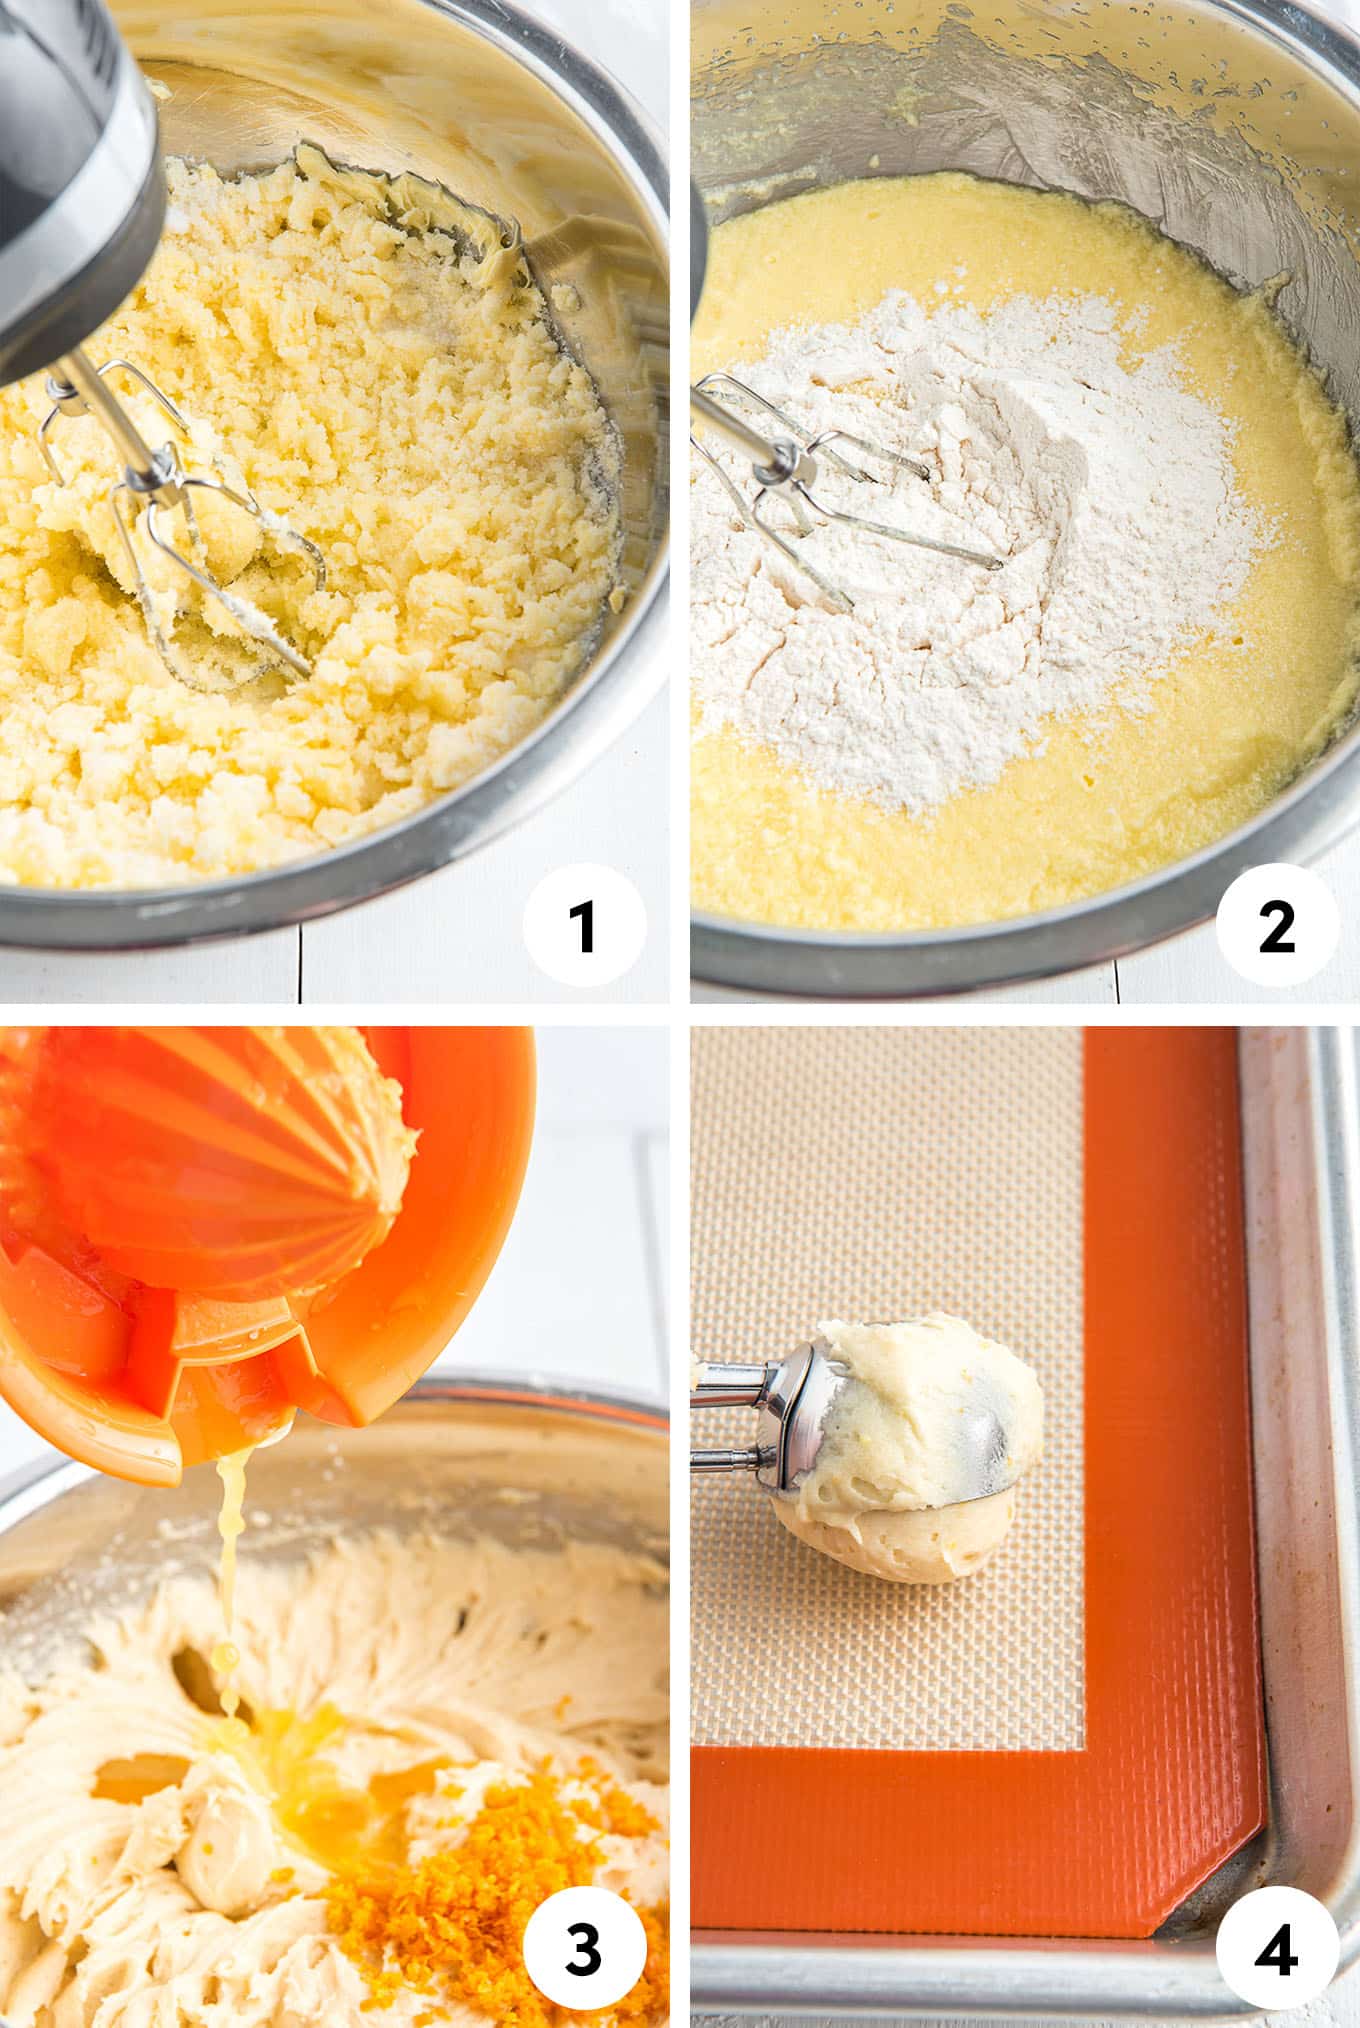 Step by step process photos for orange creamsicle cookie.